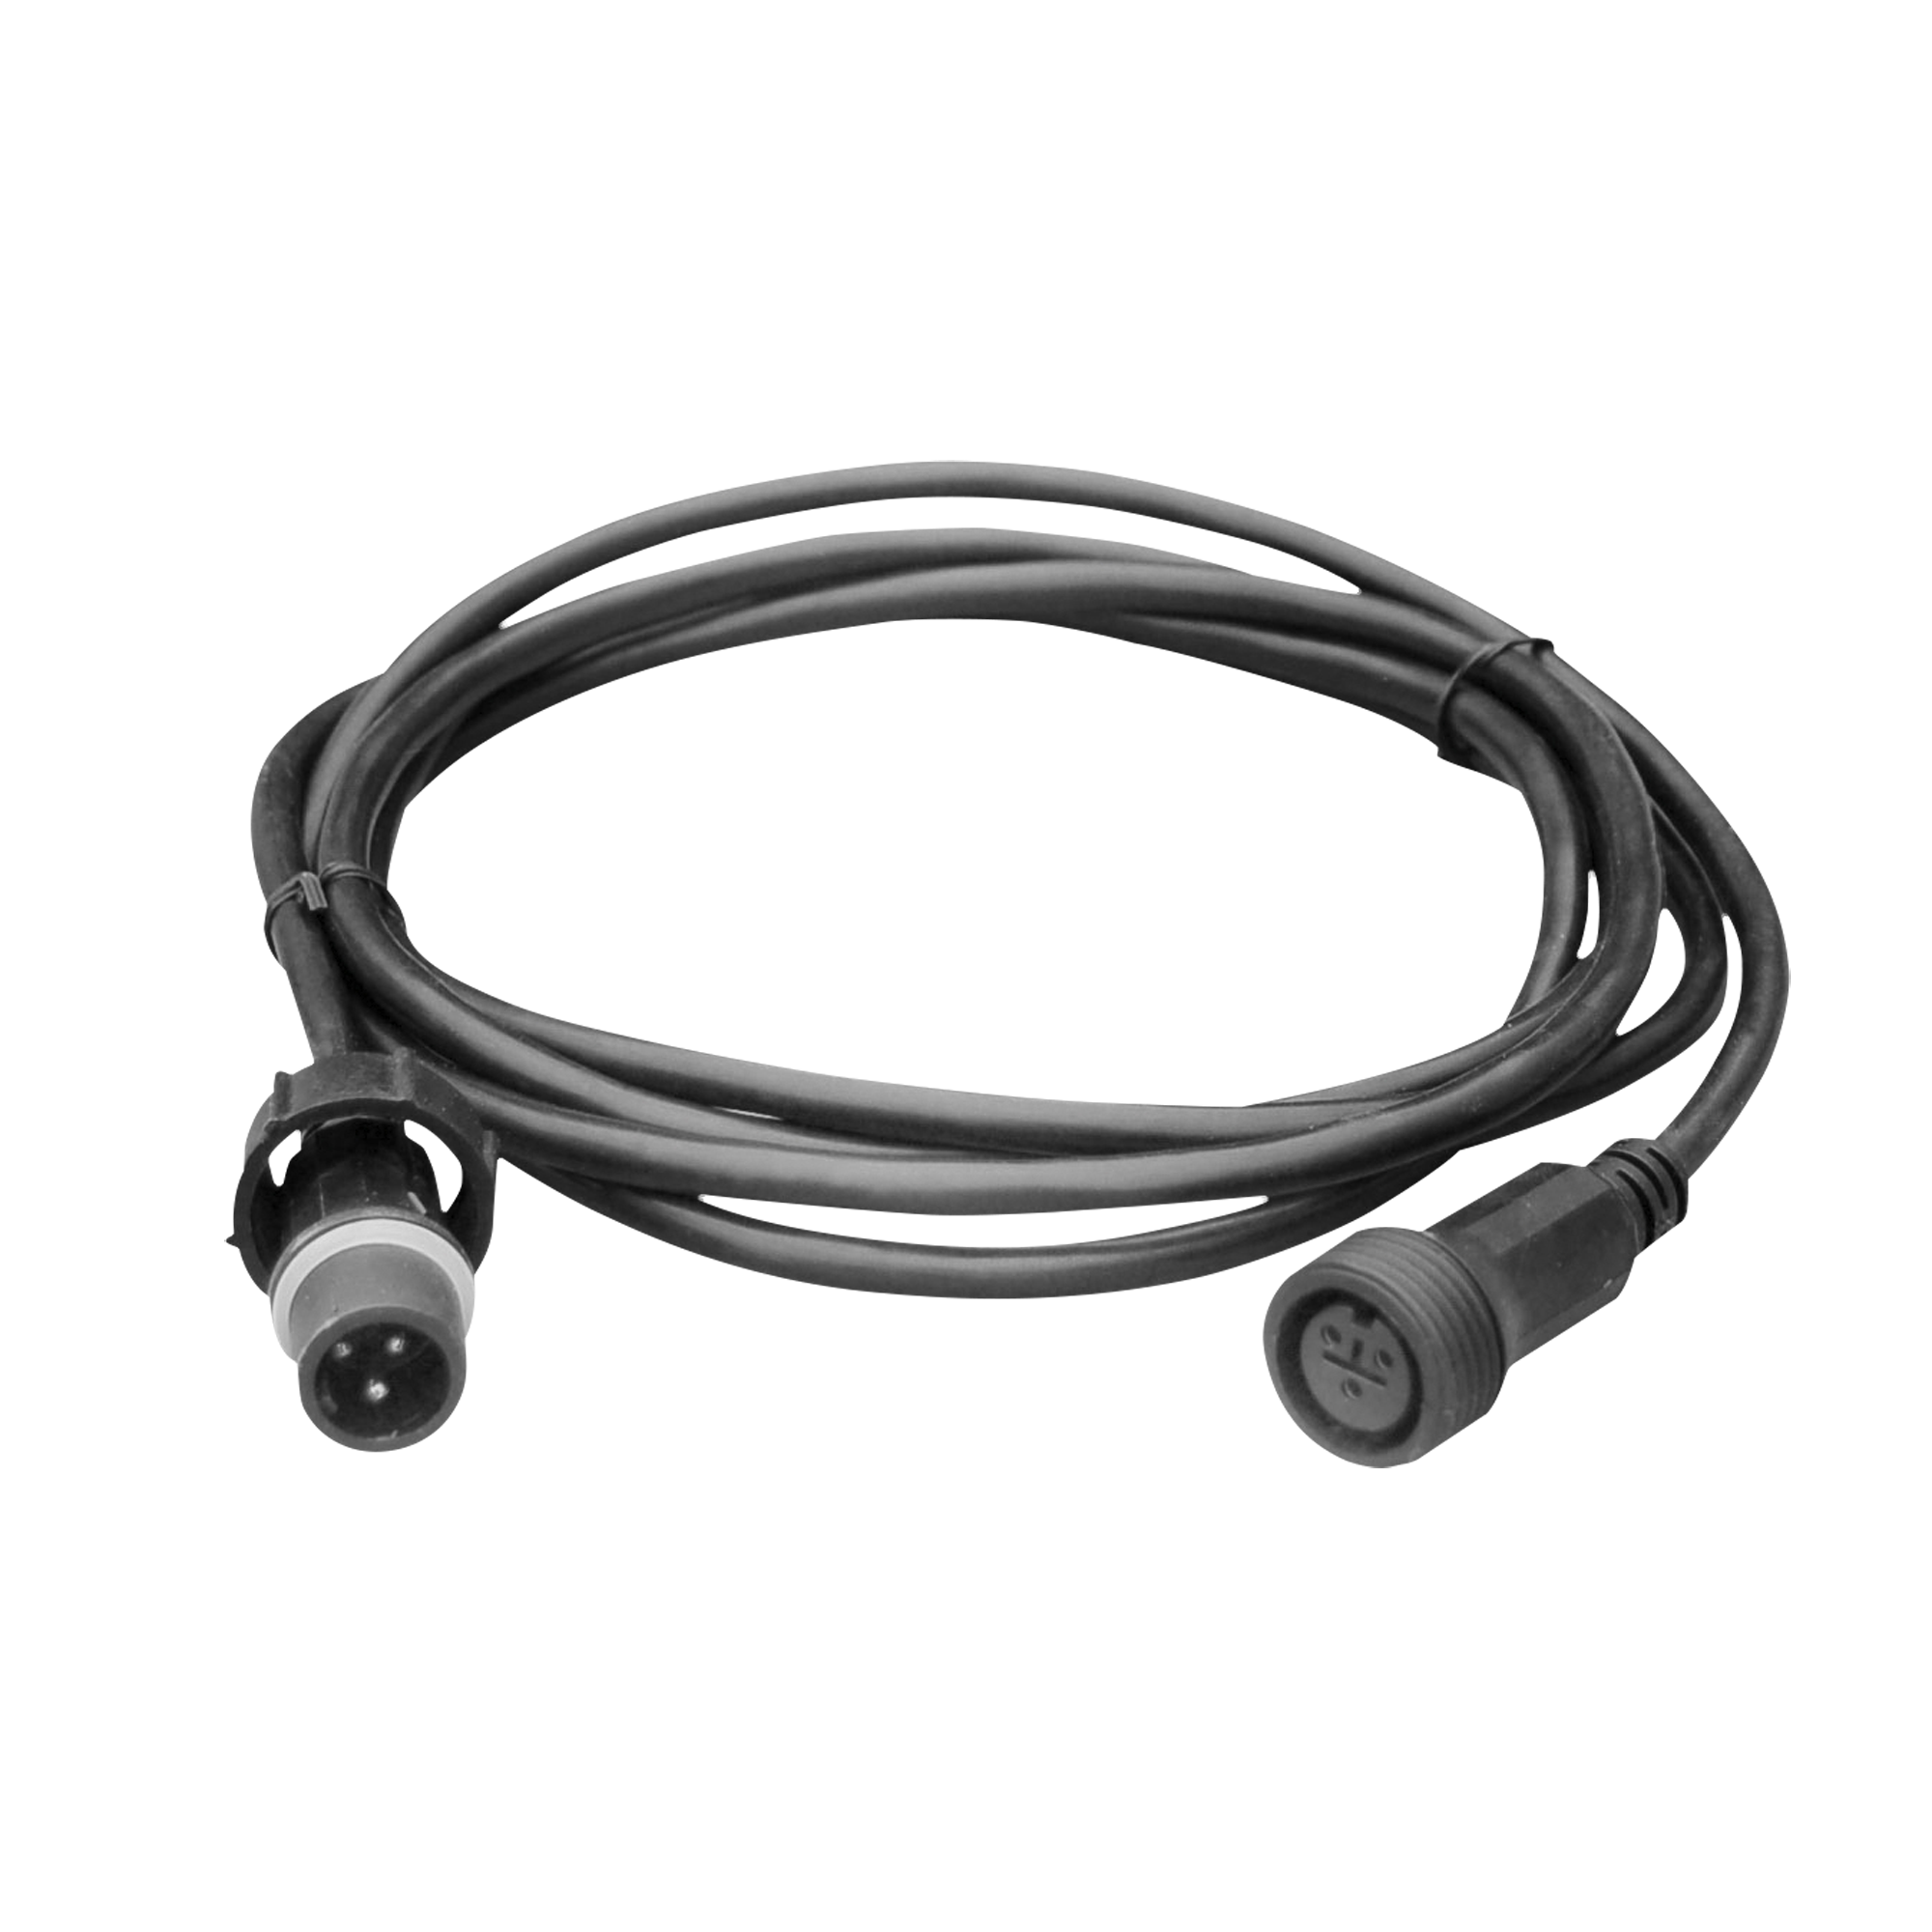 IP65 Data Extension Cable for Spectral Series - Onlinediscowinkel.nl